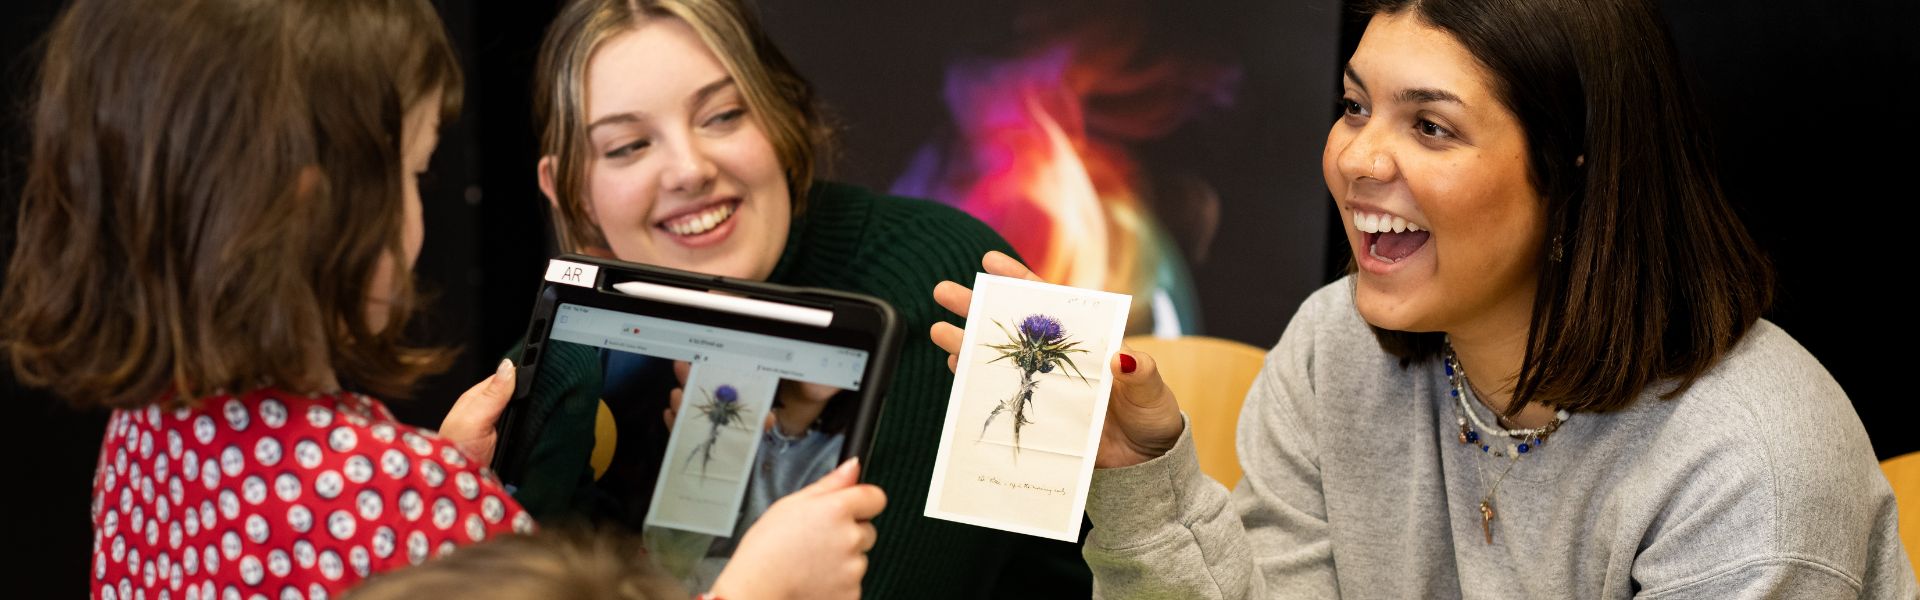 a young girl looks at a picture of a flower through an ipad screen